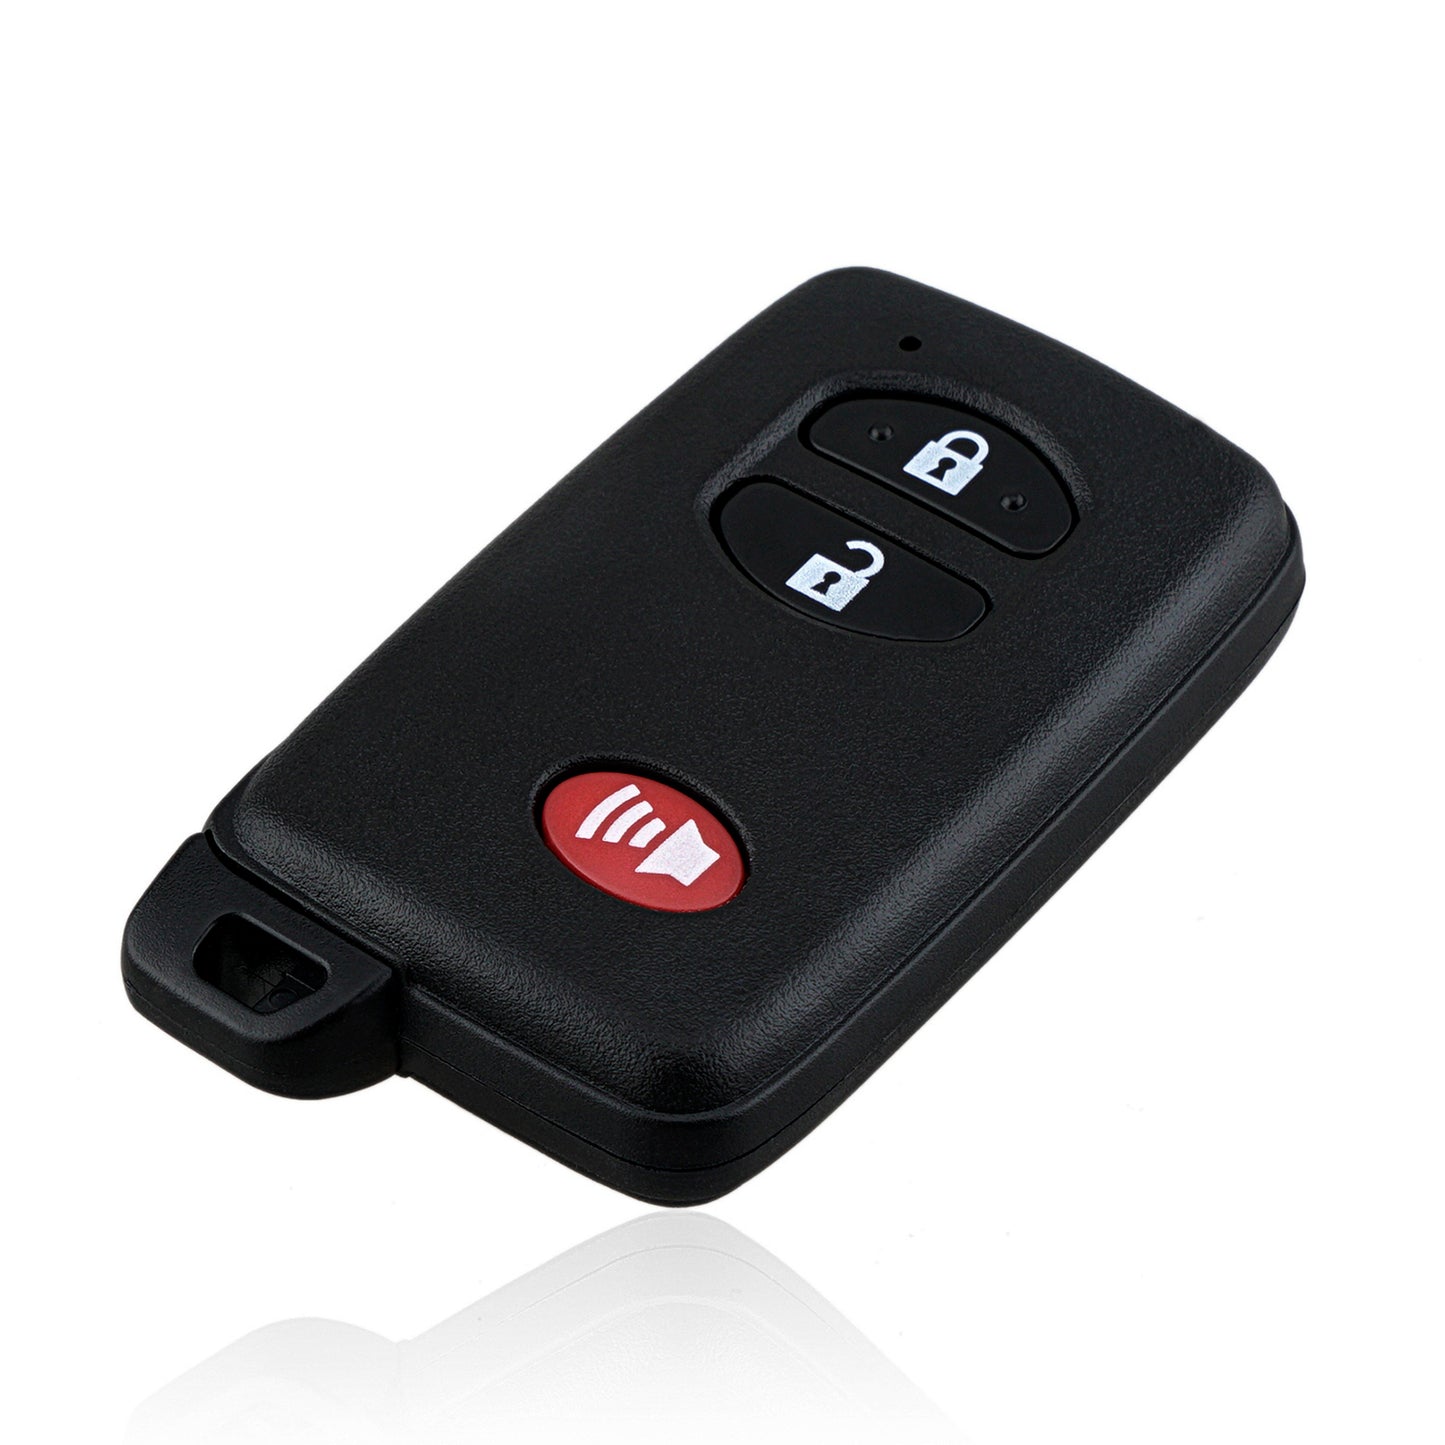 3 Buttons 314.3MHz Smart Keyless Entry Proximity Remote Fob Car Key For 2010-2019 Toyota Venza Prius C V 4Runner FCC ID HYQ14ACX SKU : H524